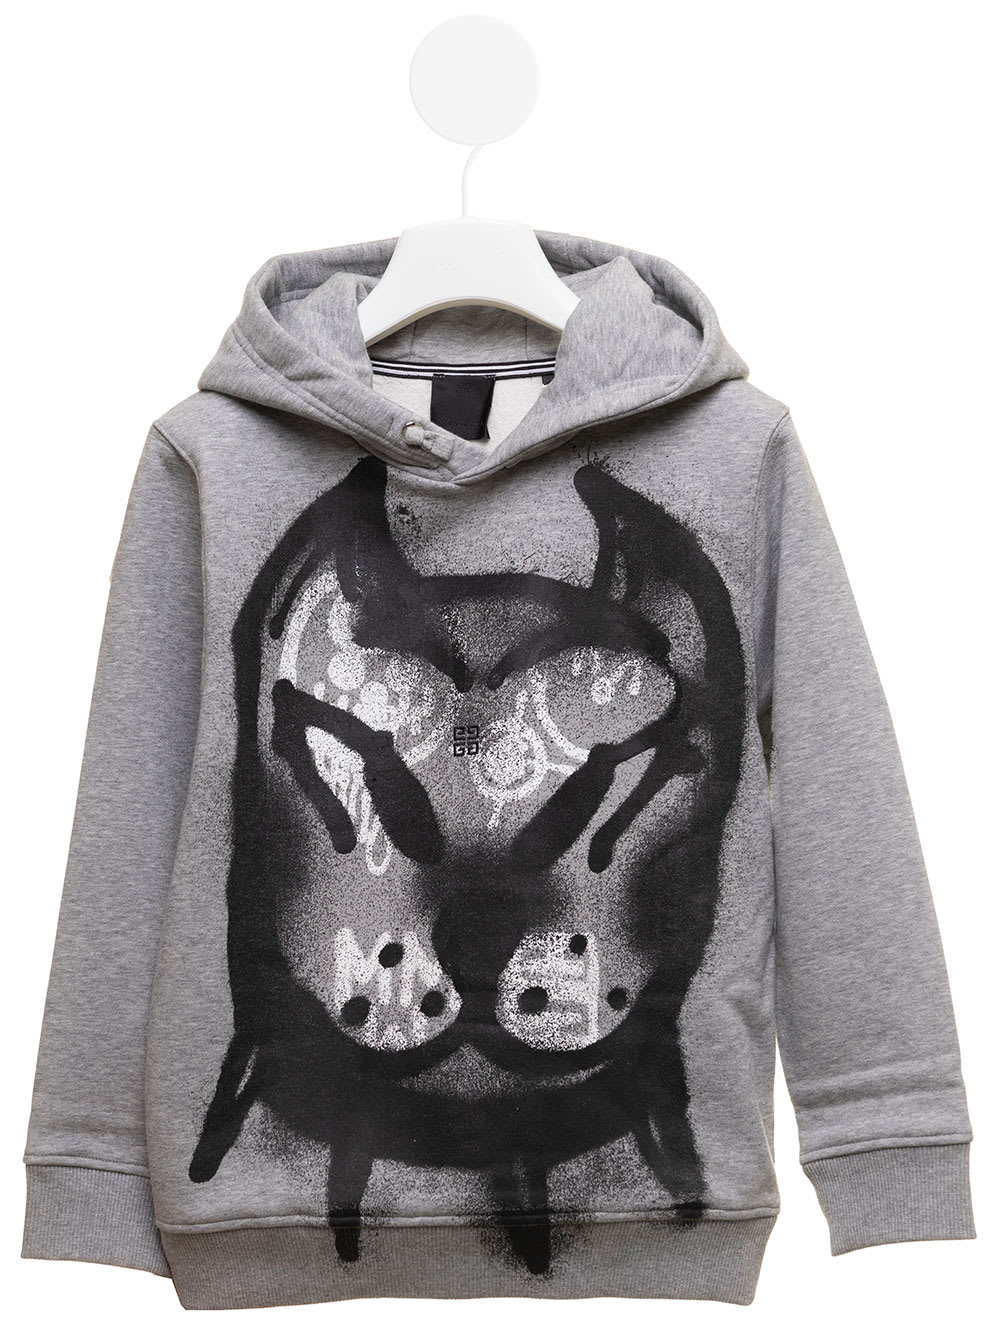 Grey Jersey Hoodie With Graffiti Front Print Givenchy Kids Boy